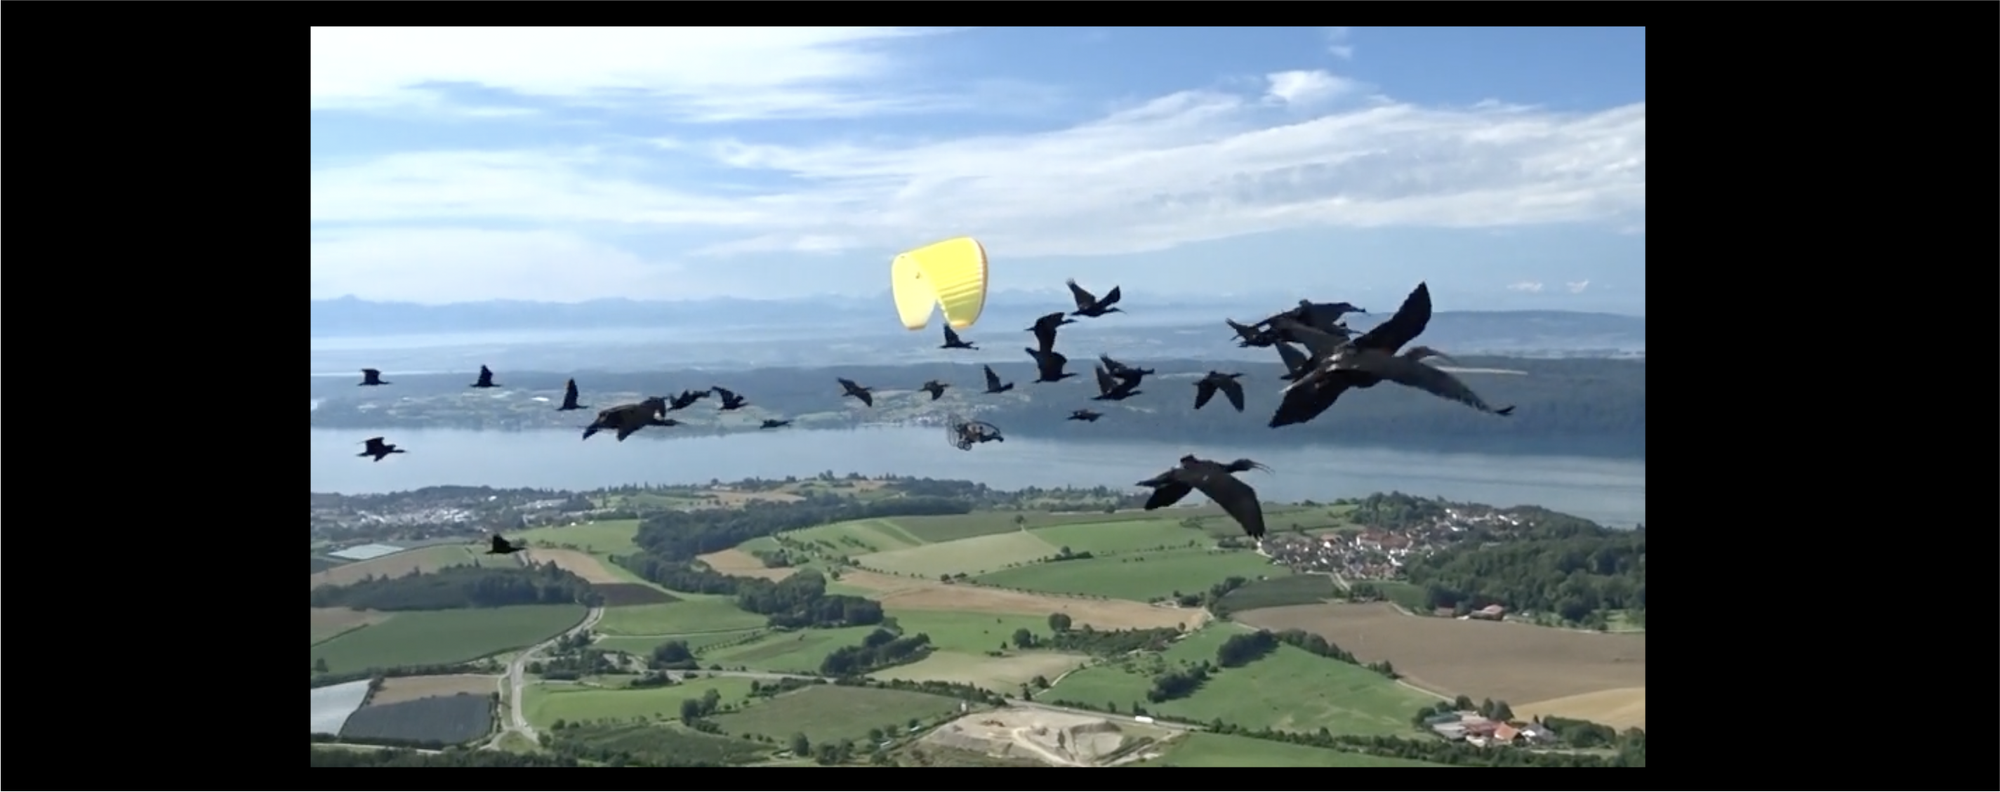 1/24: Communities in Defense of the Environment, Preventing Mega-Fires, Flying with the Bald Ibis